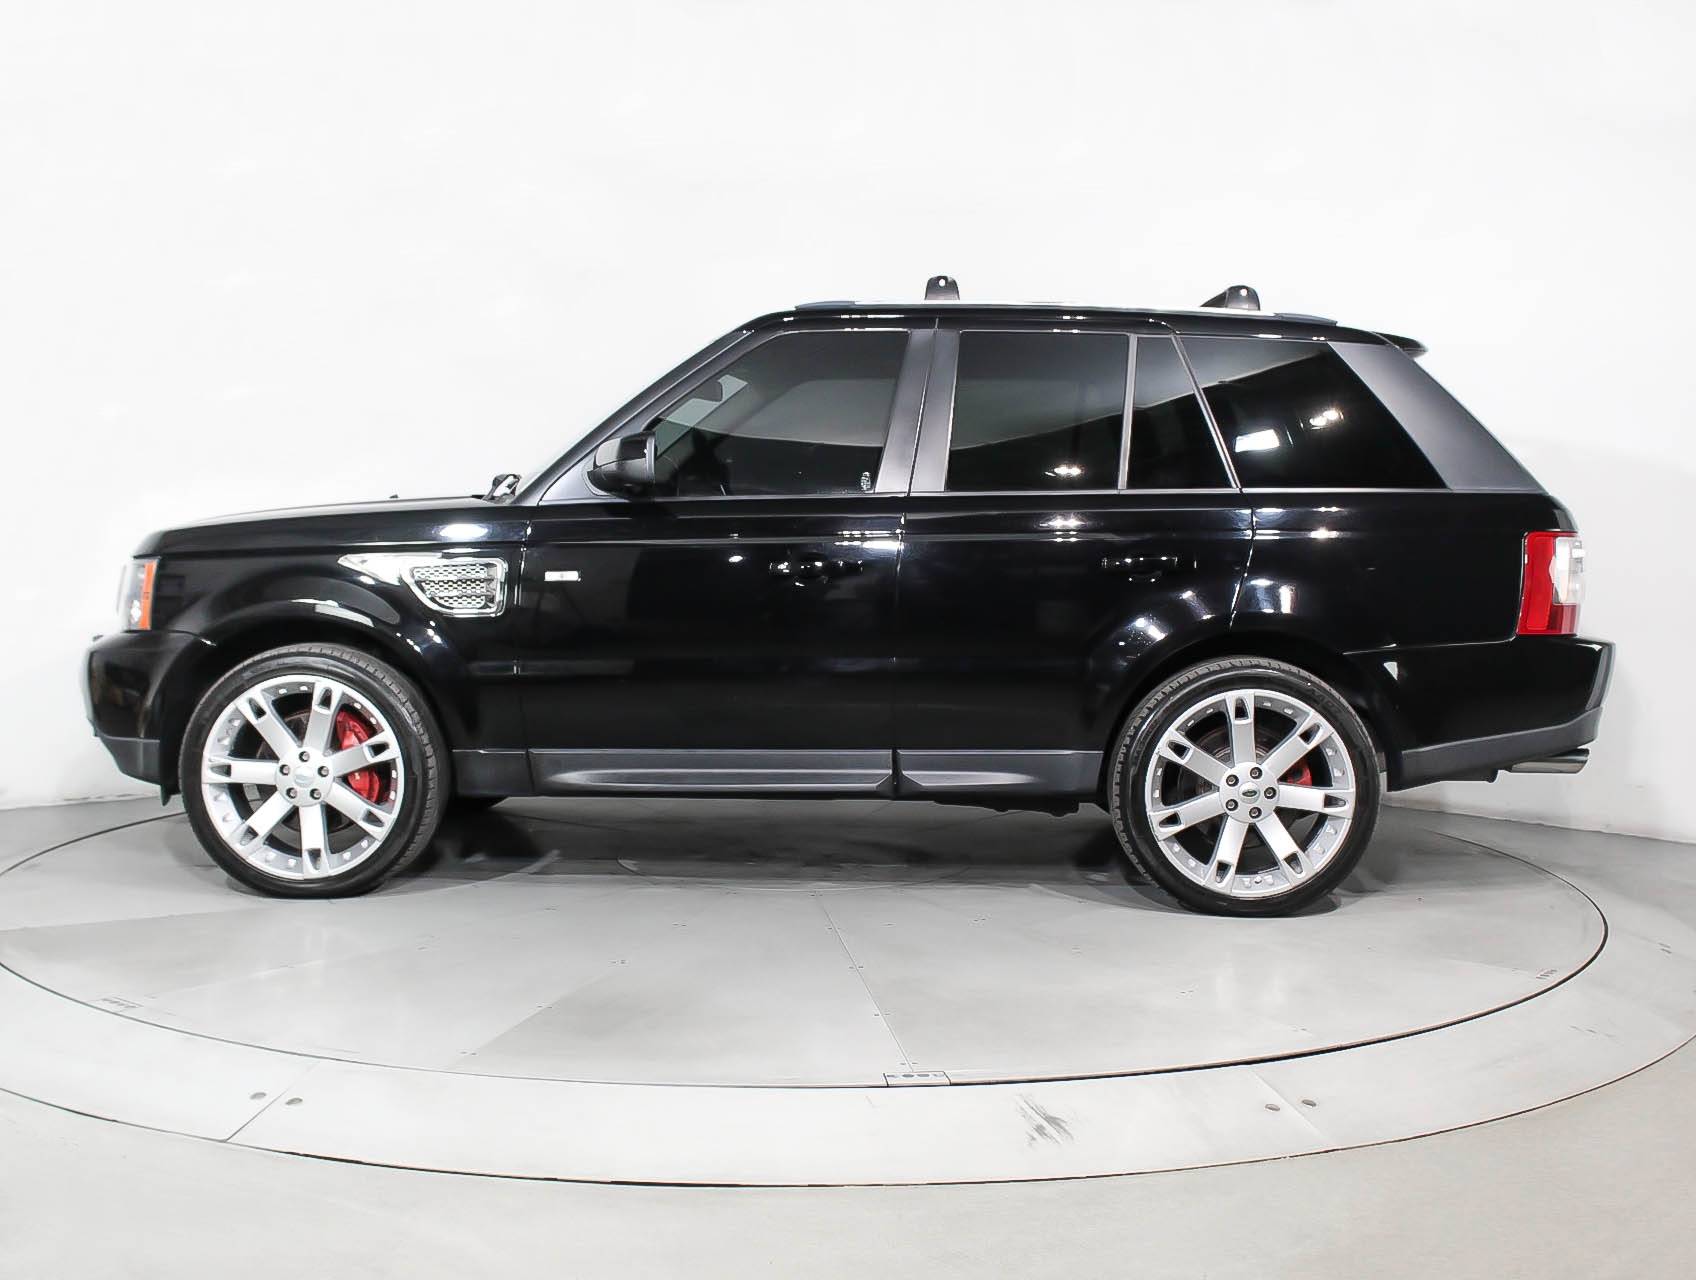 Used 2008 LAND ROVER RANGE ROVER SPORT SC for sale in HOLLYWOOD | 91843